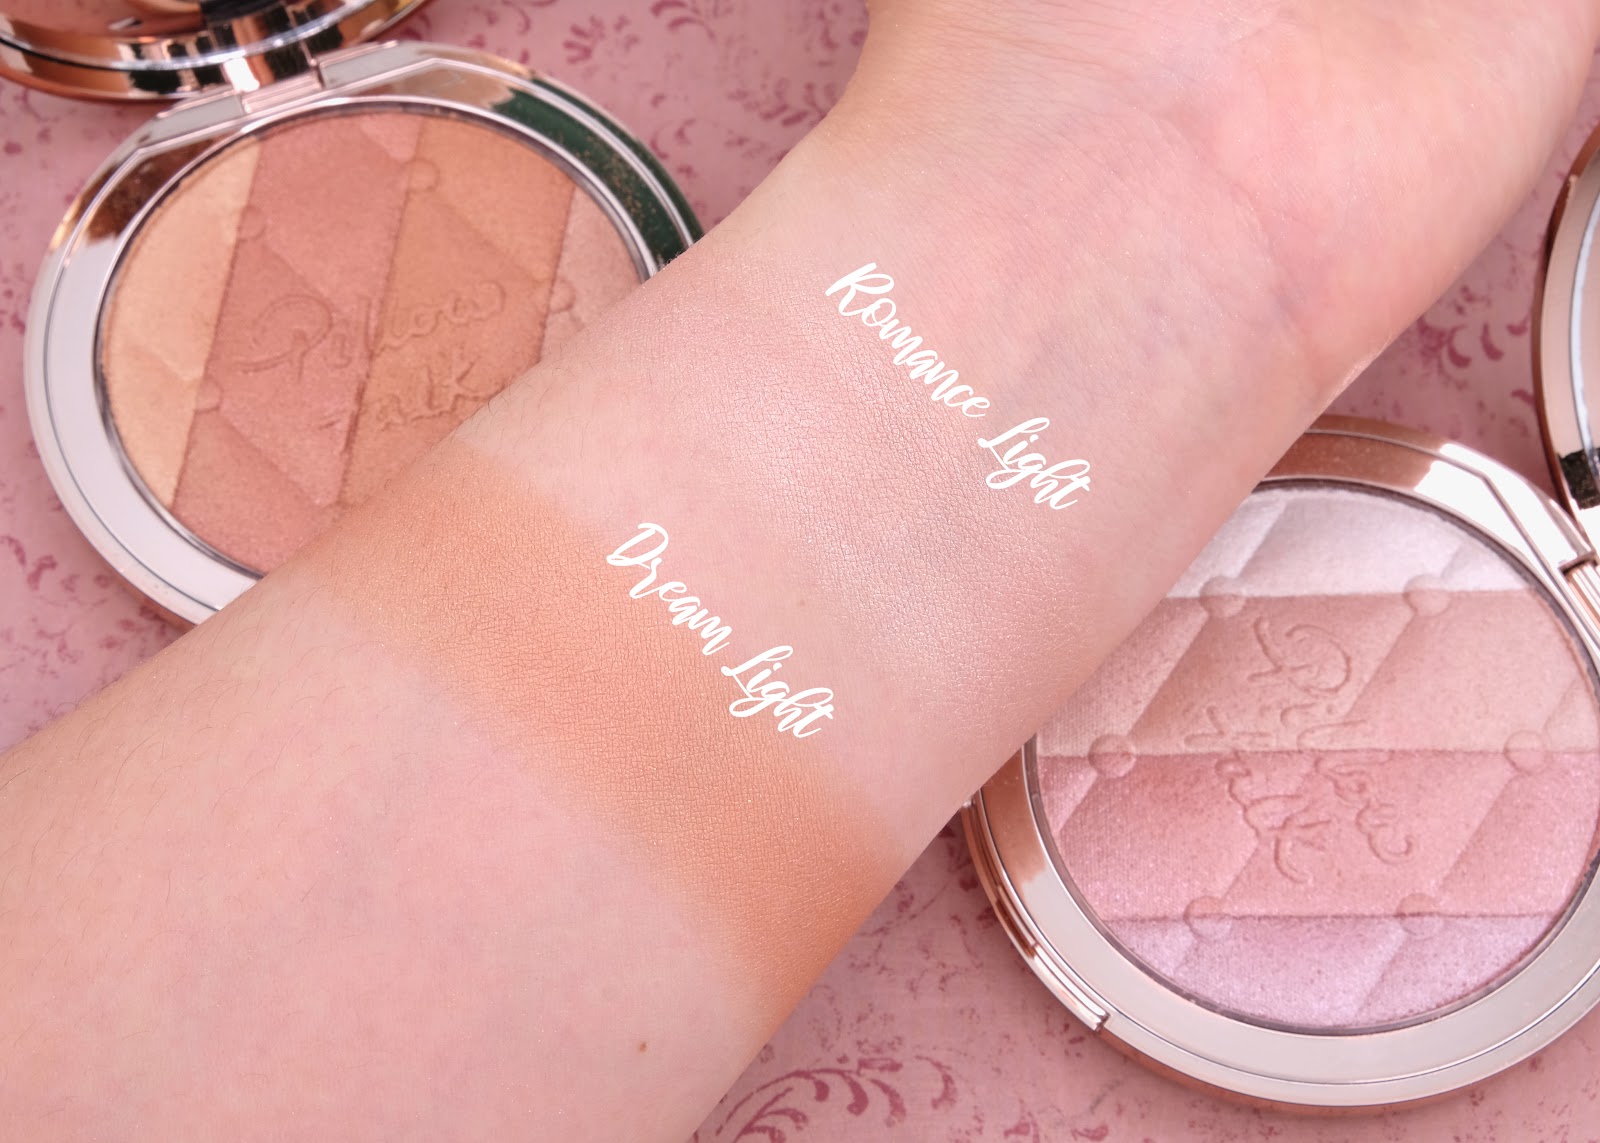 Charlotte Tilbury | Pillow Talk Multi-Glow Highlighter: Review and Swatches